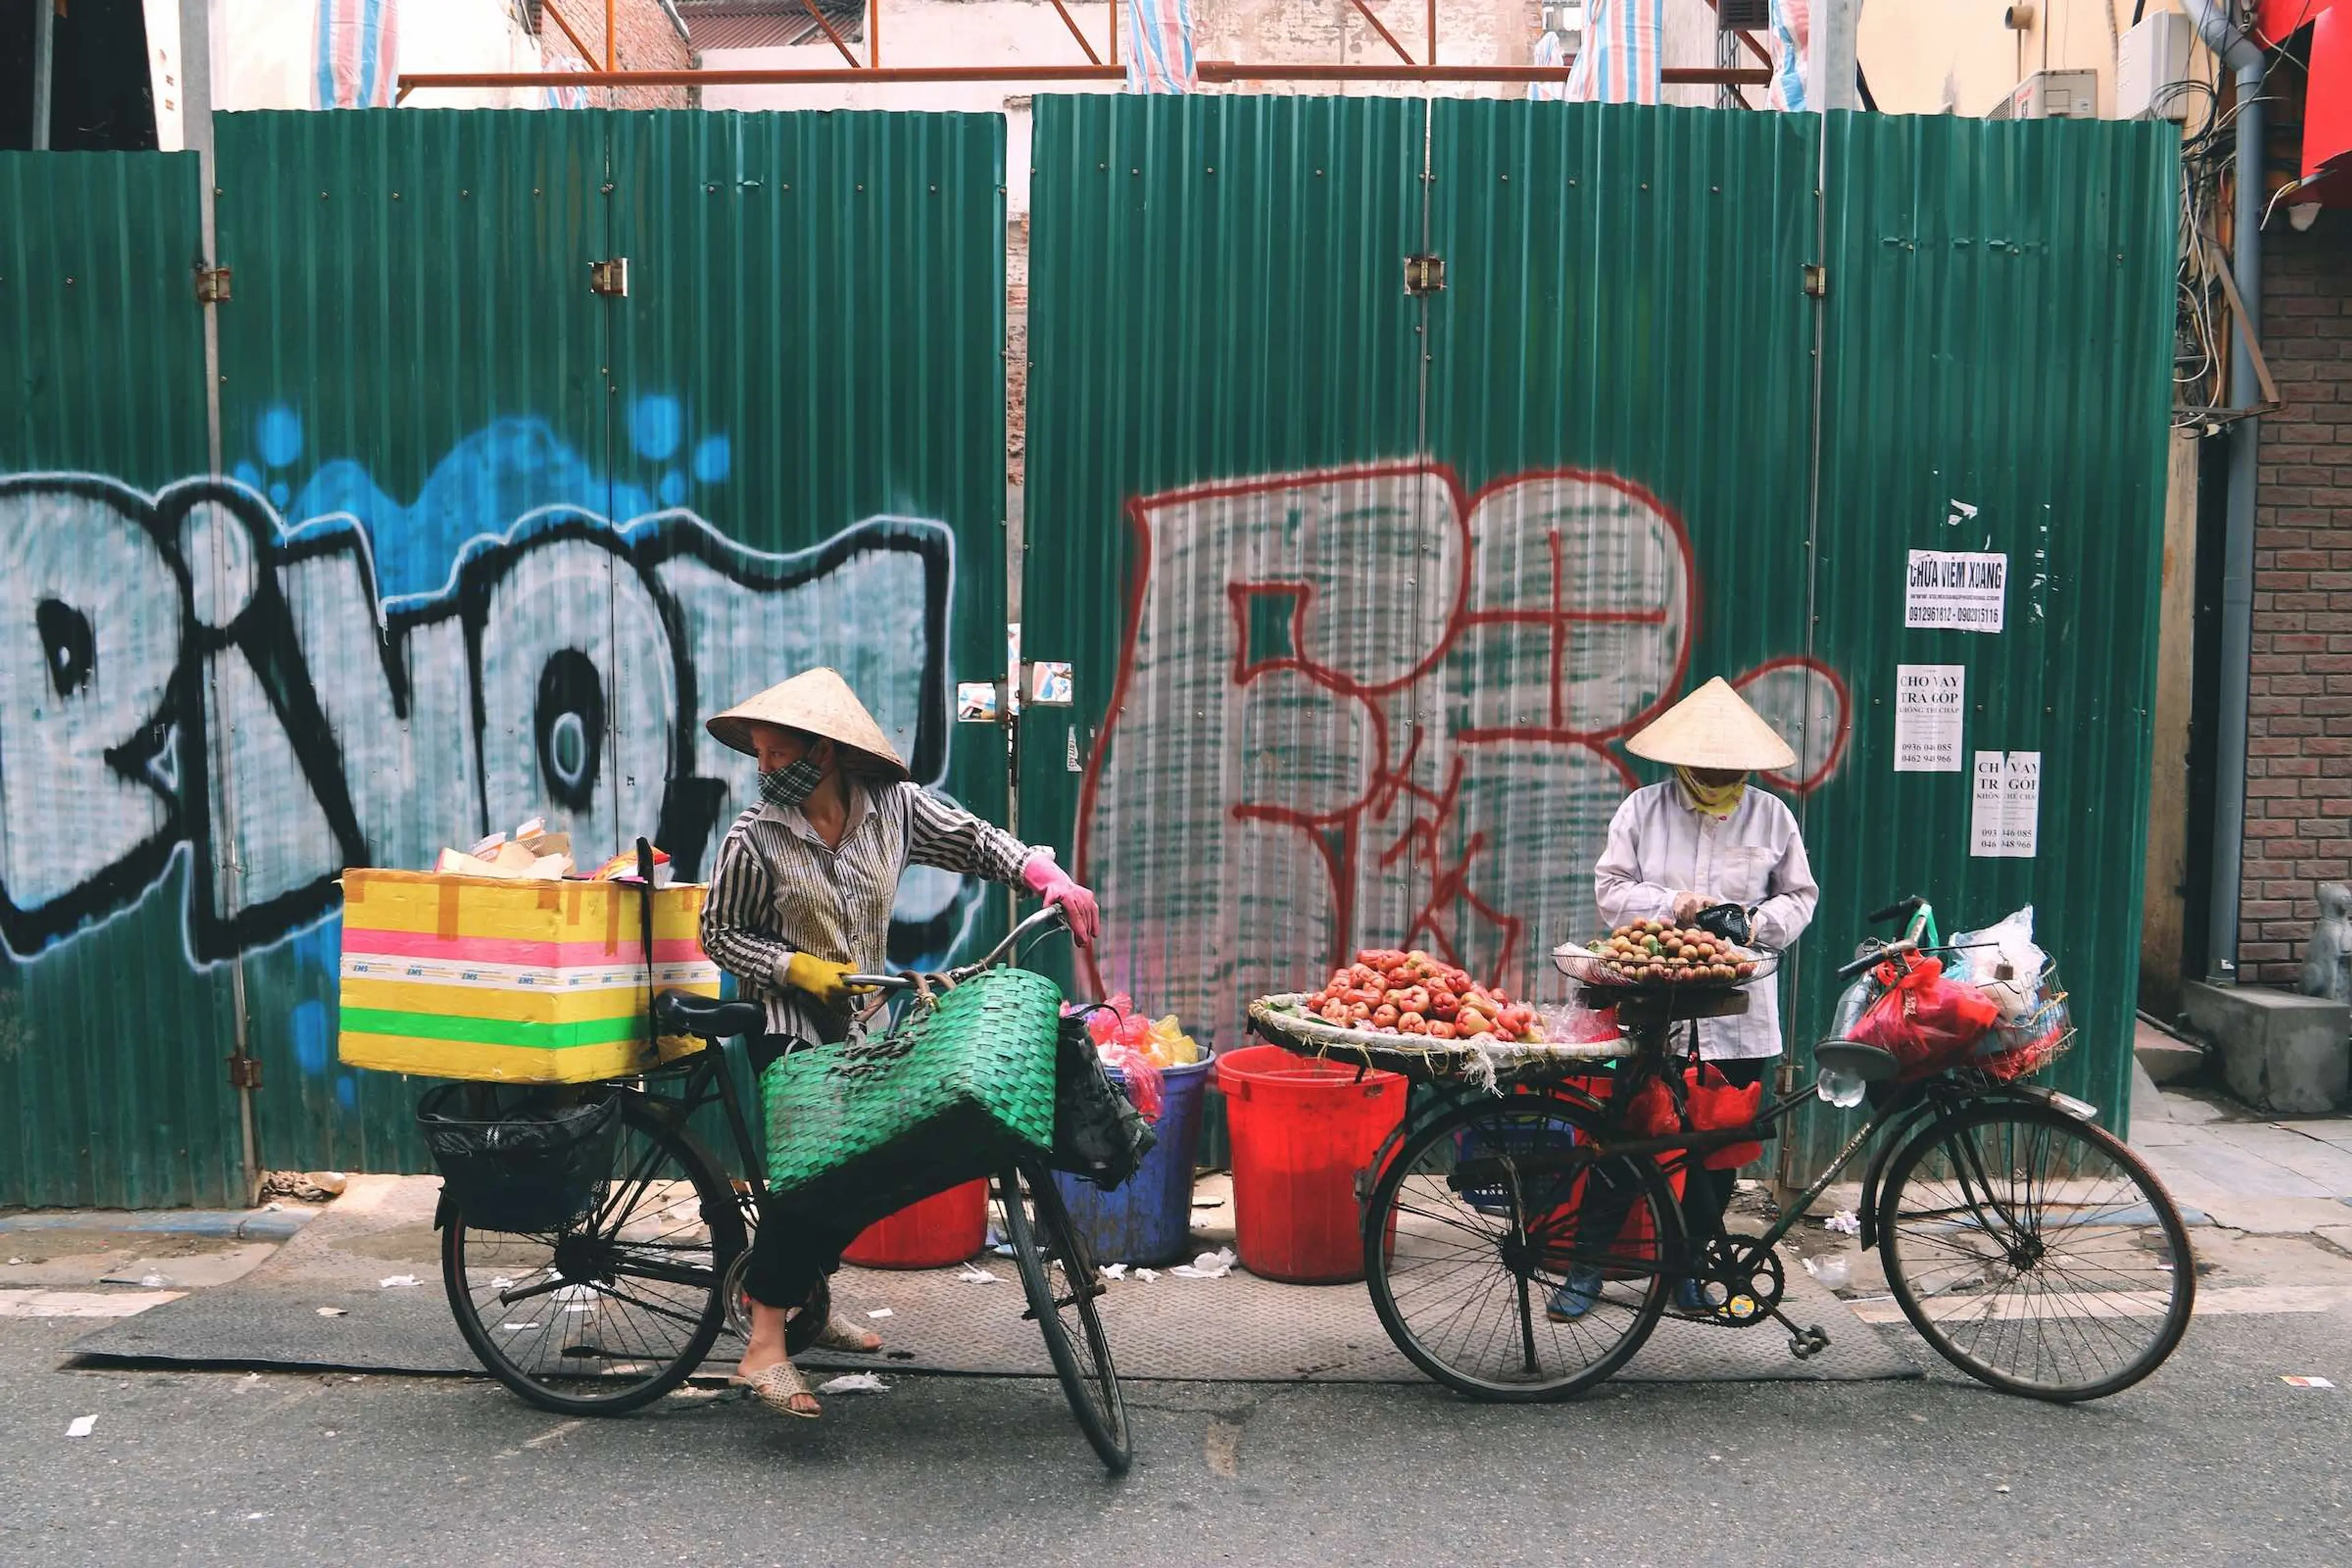 Vietnam is a great place for cycling activity due to great culture and experiences